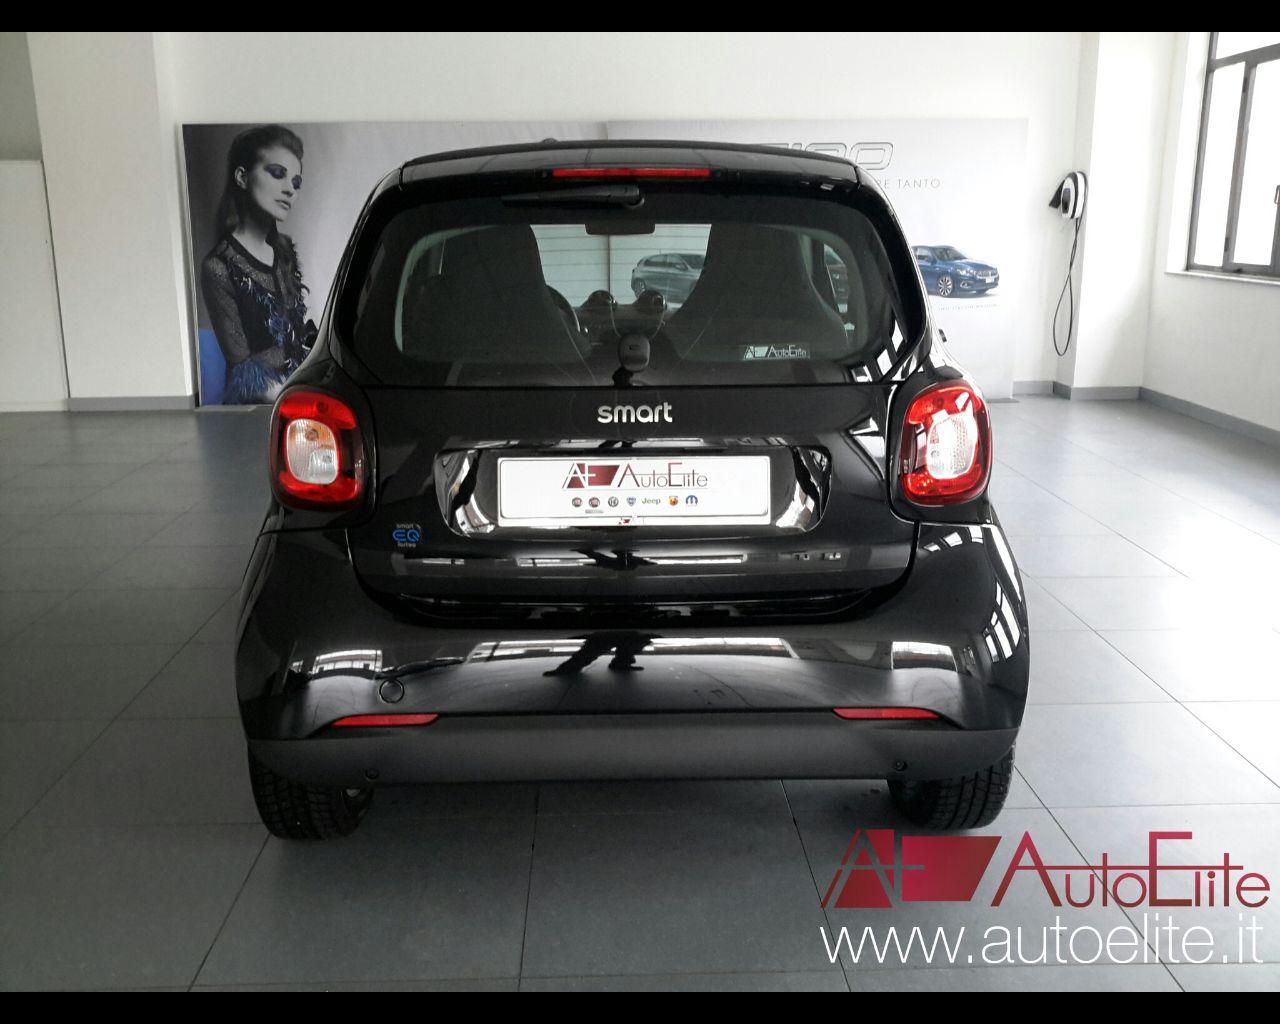 SMART fortwo 3ªs.(C/A453) fortwo EQ Pure